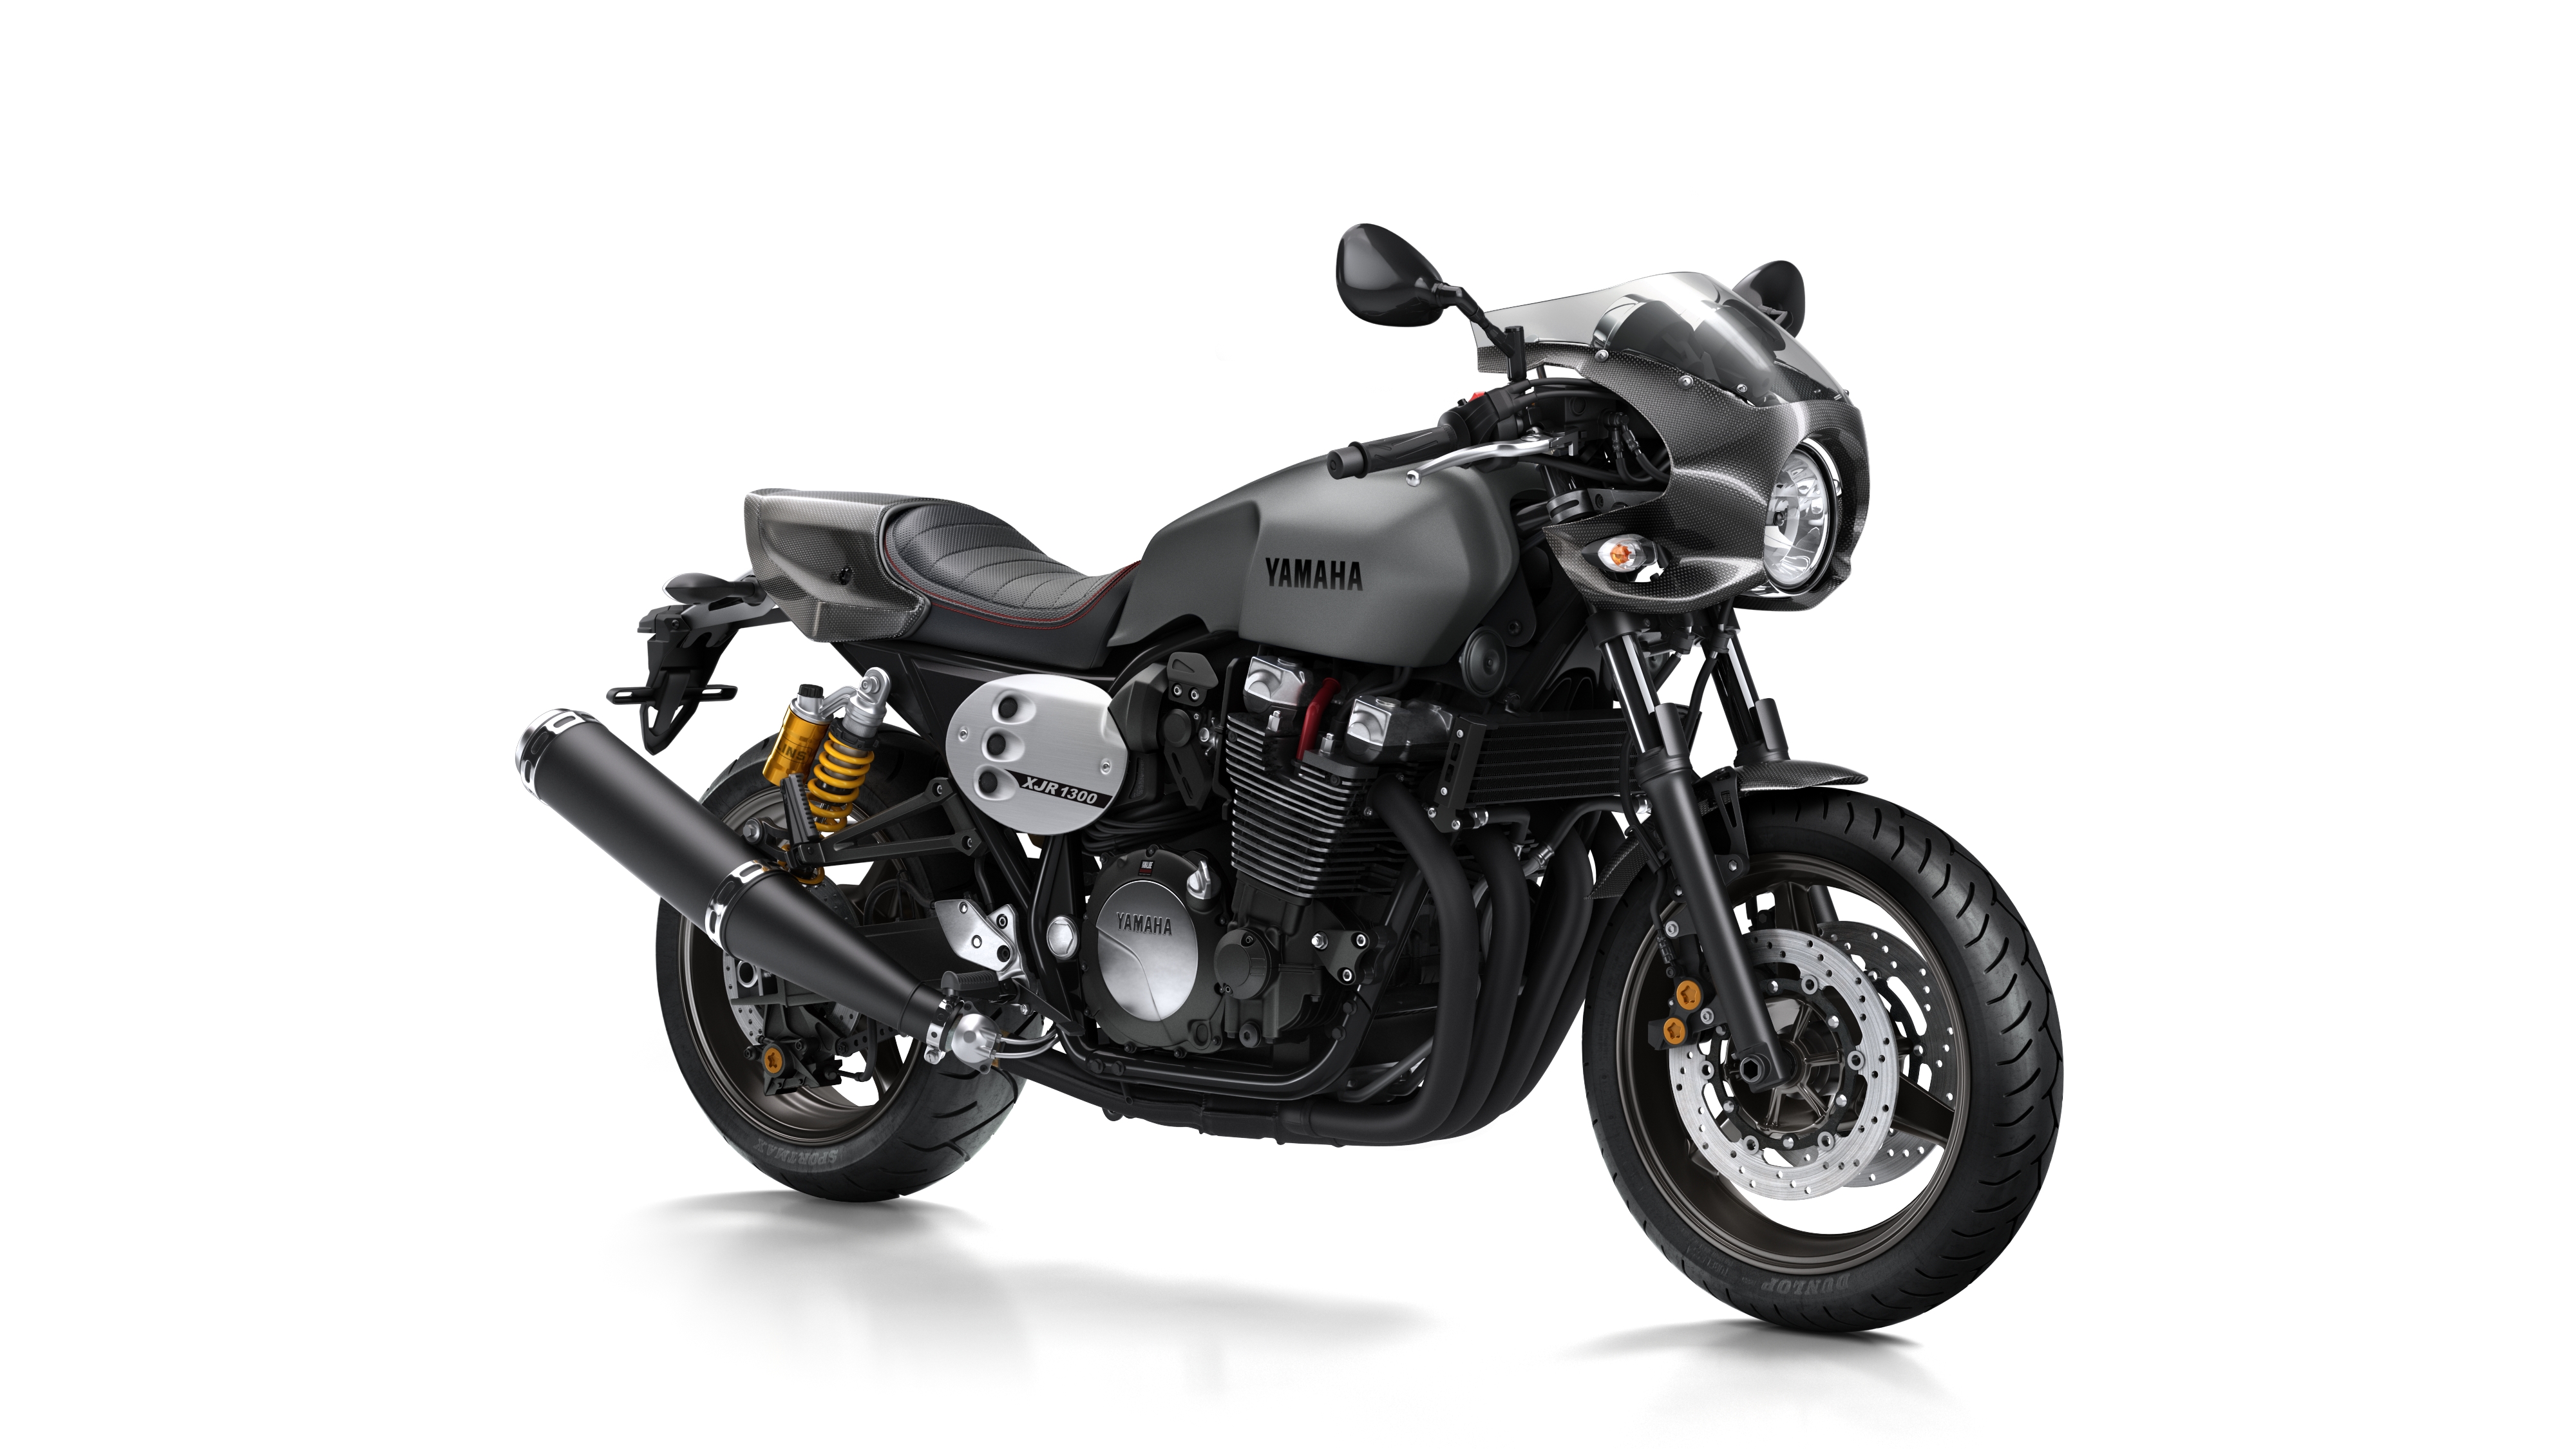 First ride: Yamaha XJR1300 Racer review